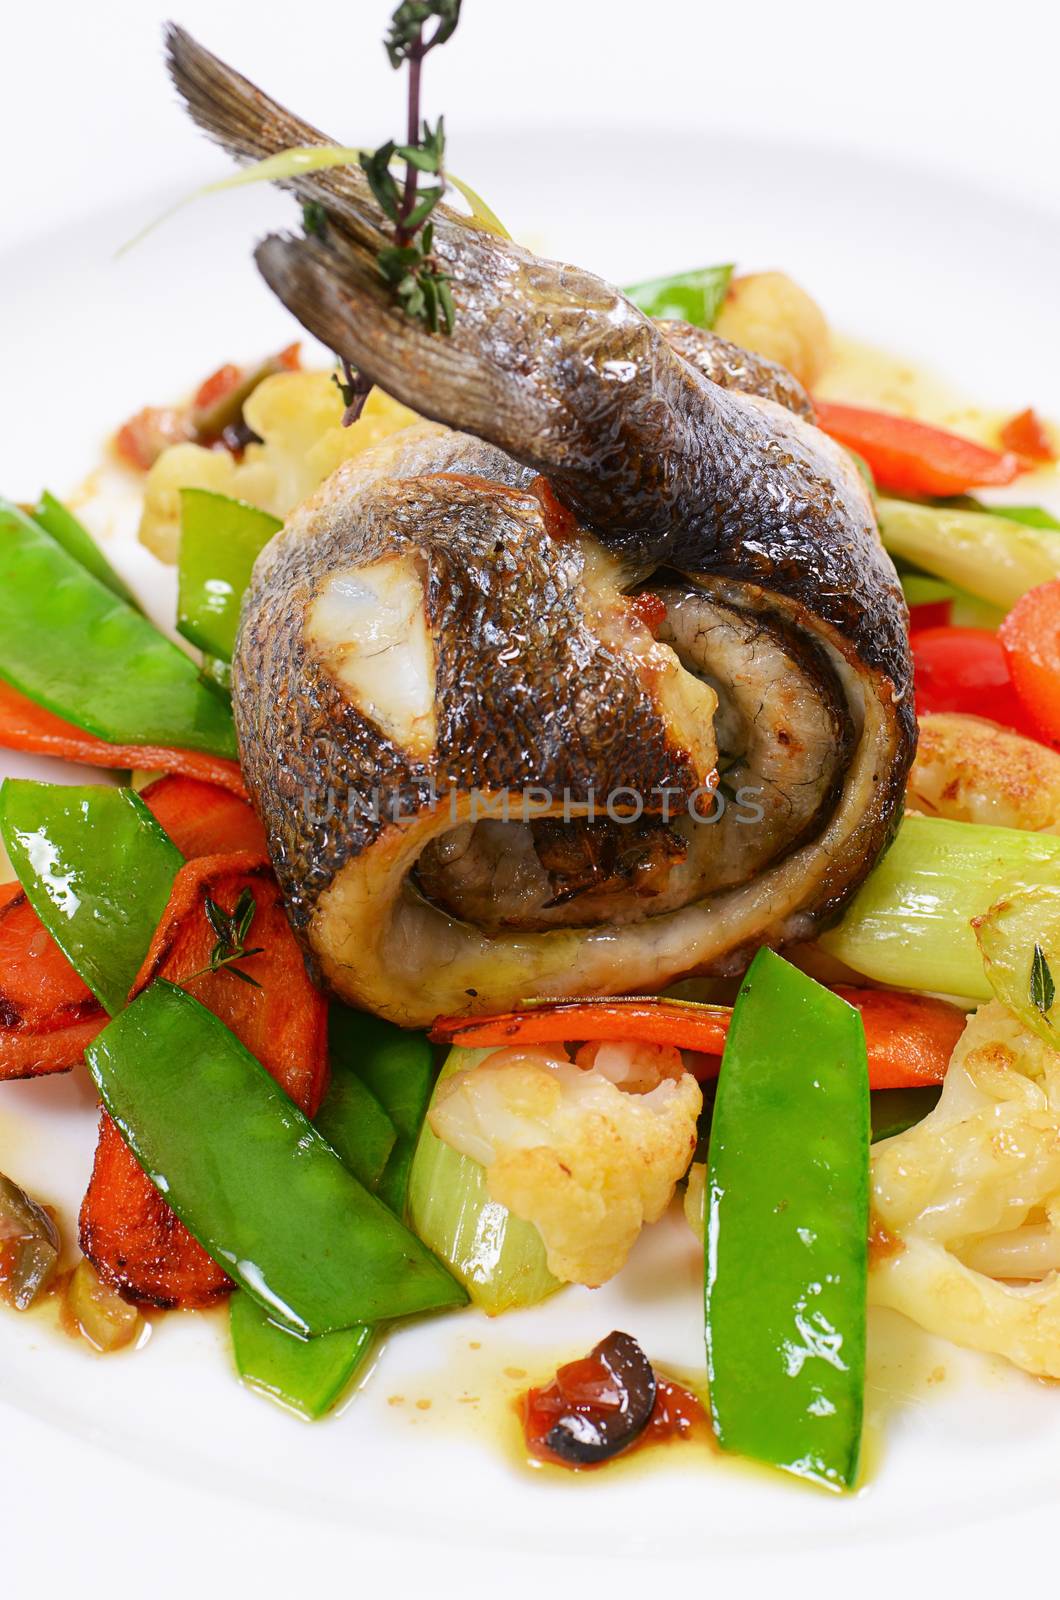 Sea bass fillet with vegetables and sauce